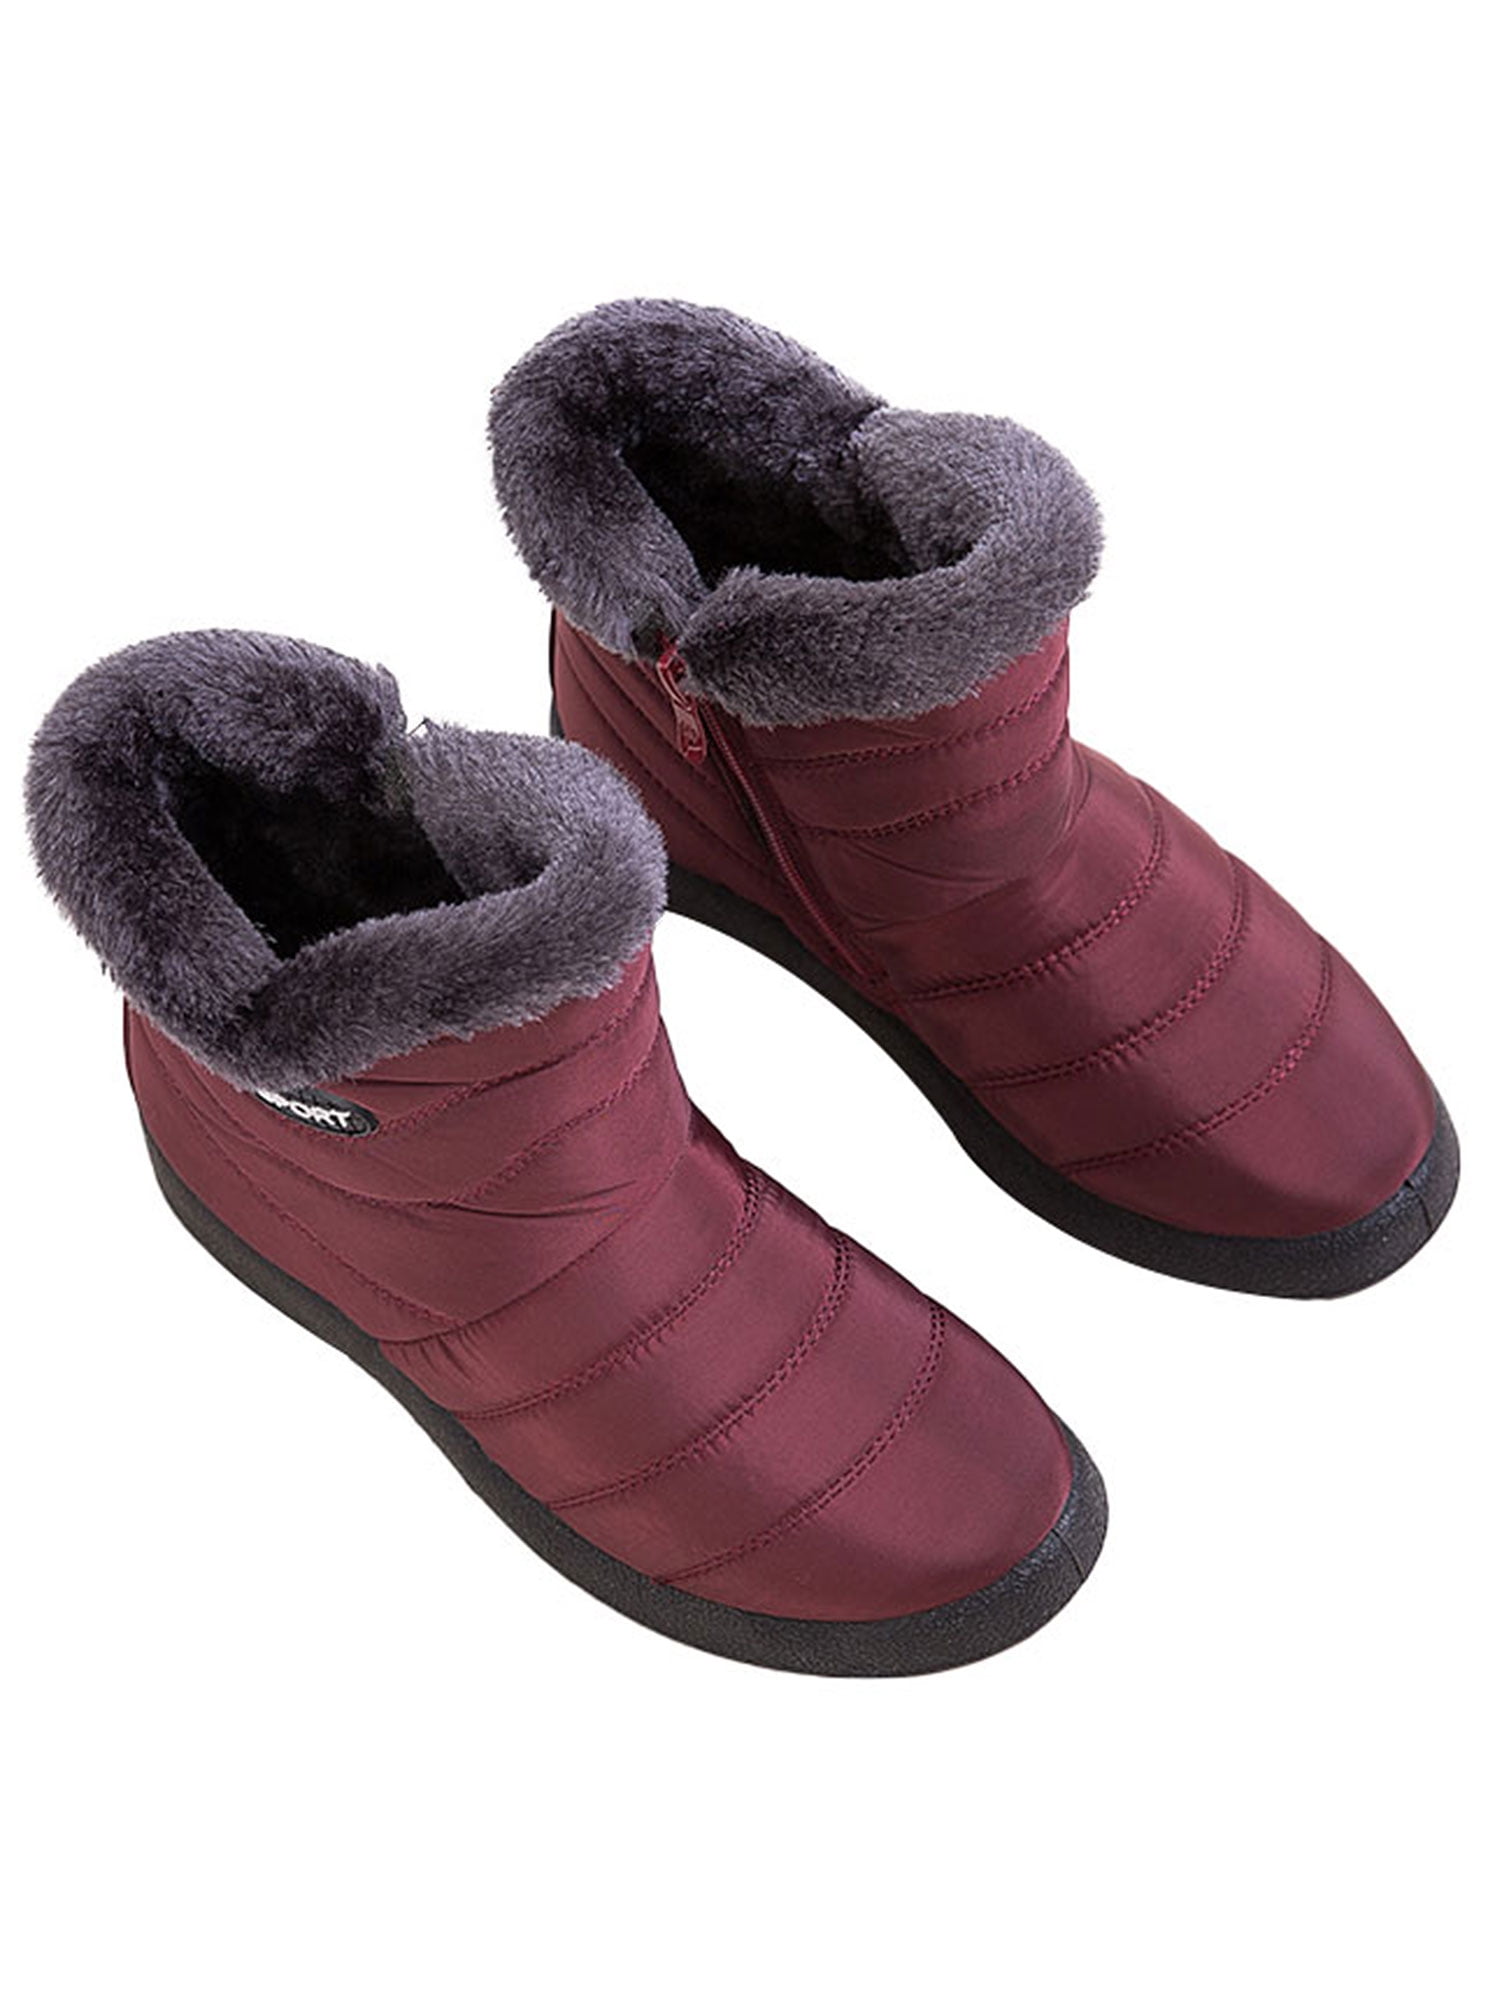 Ladies Fur Lined Ankle Snow Boots Womens Snug Grip Sole Winter Warm Shoes Size 